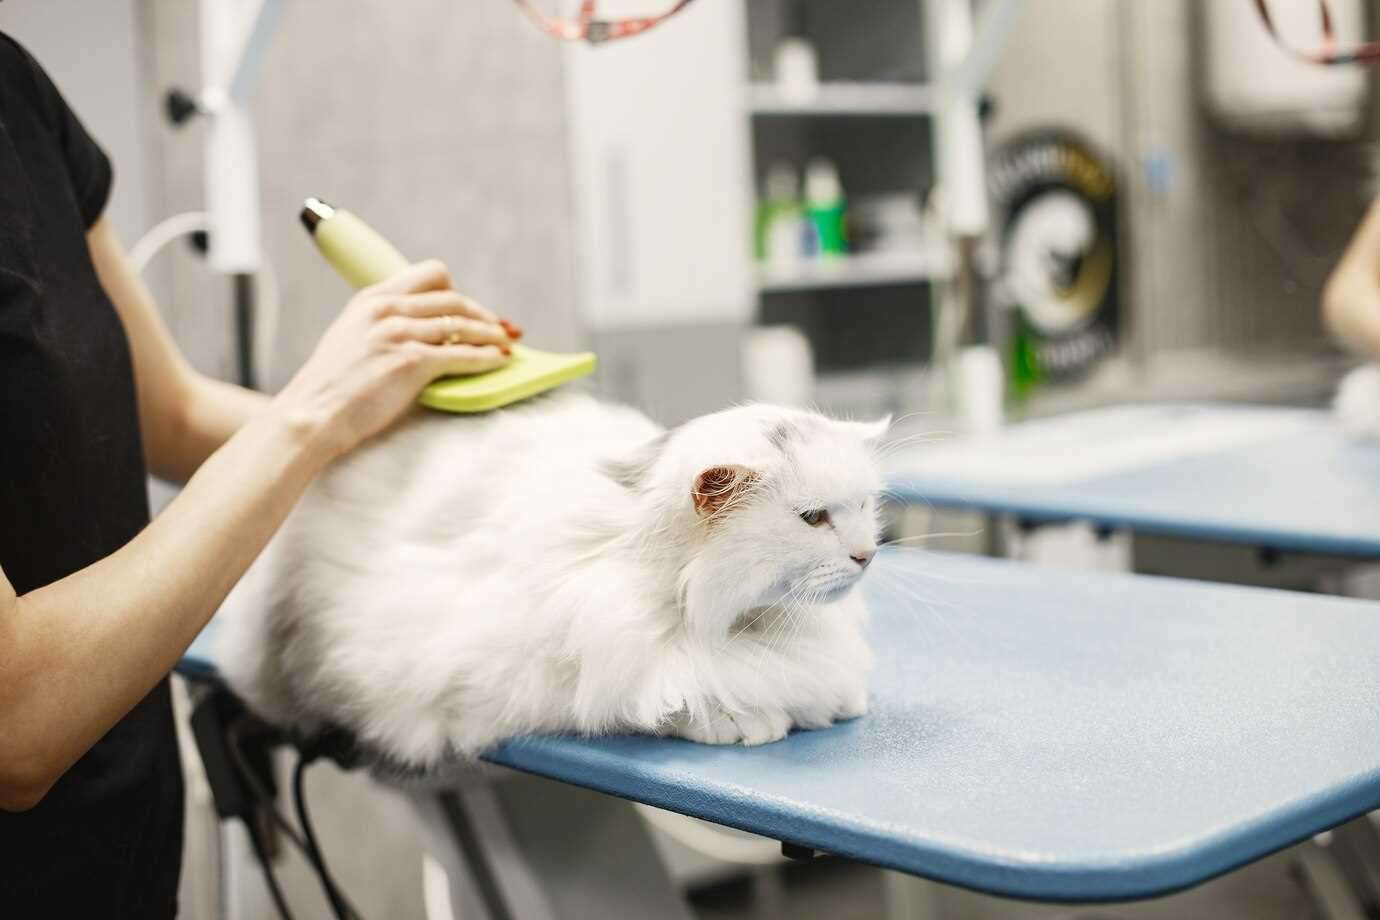 What are the some of the cat grooming tips